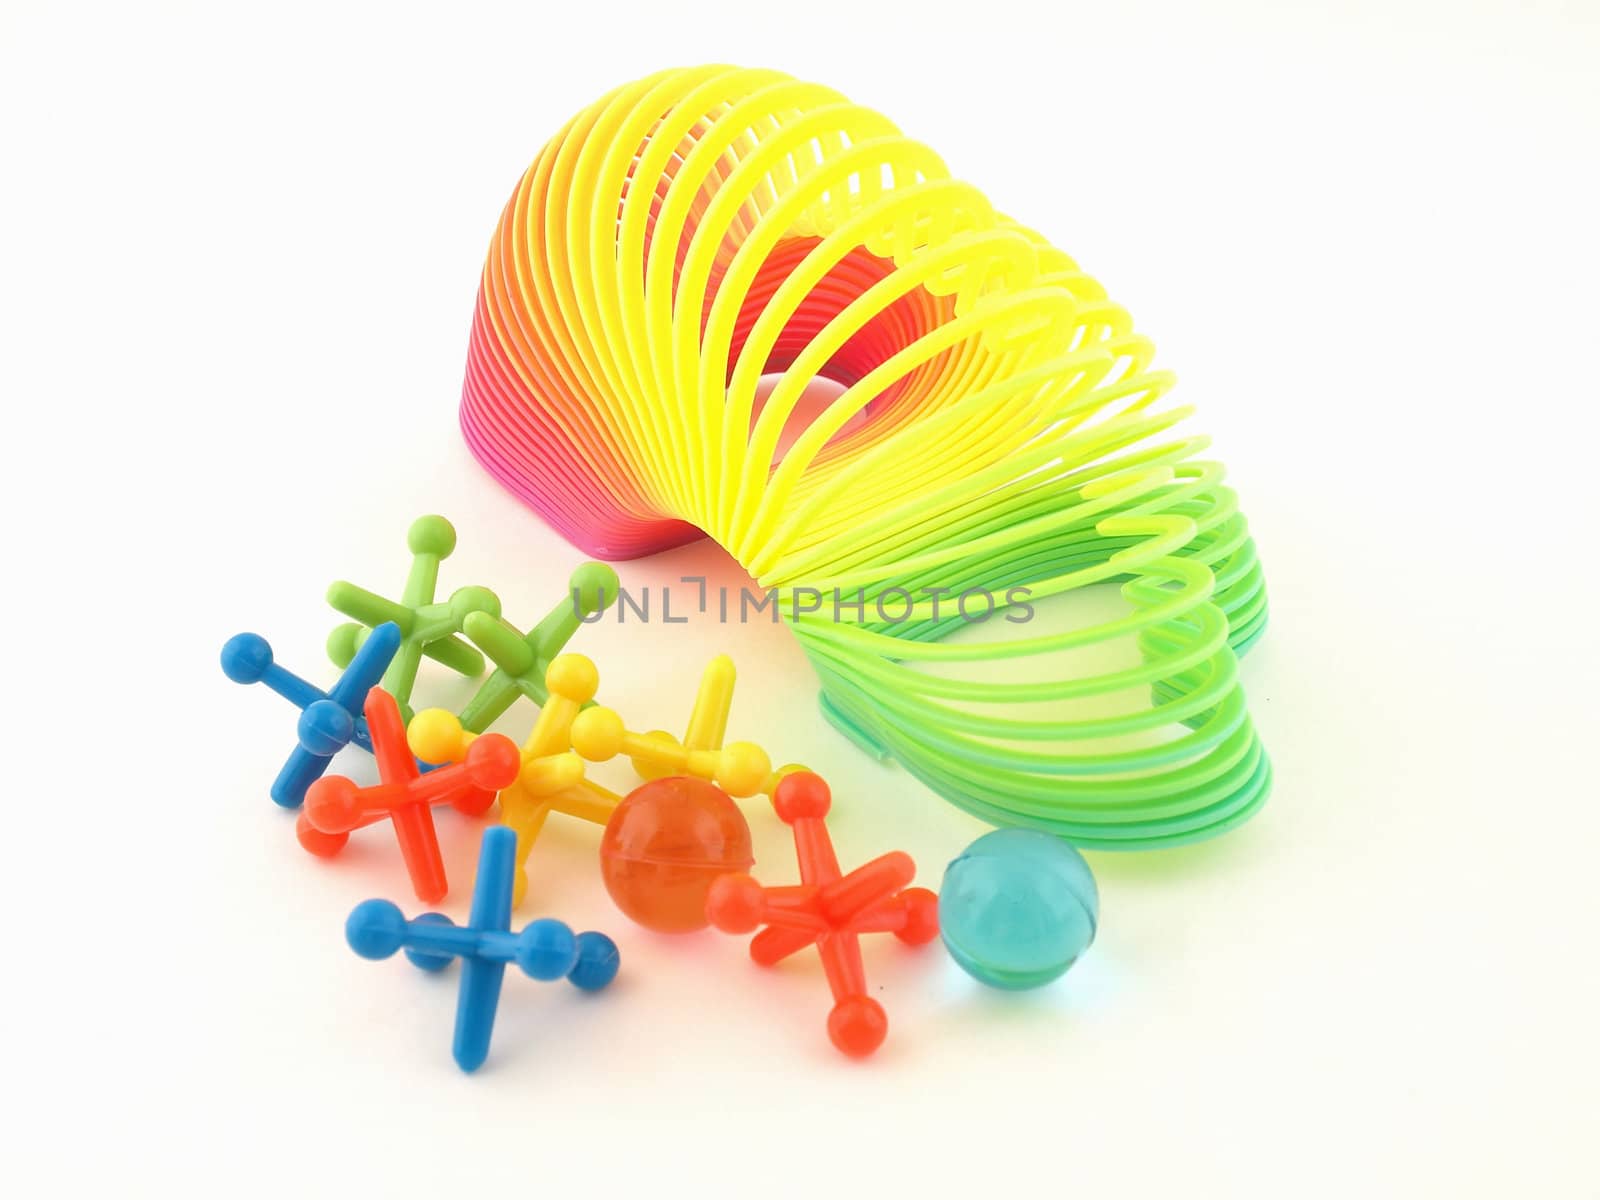 A colorful heart slinky and jacks isolated on a white background